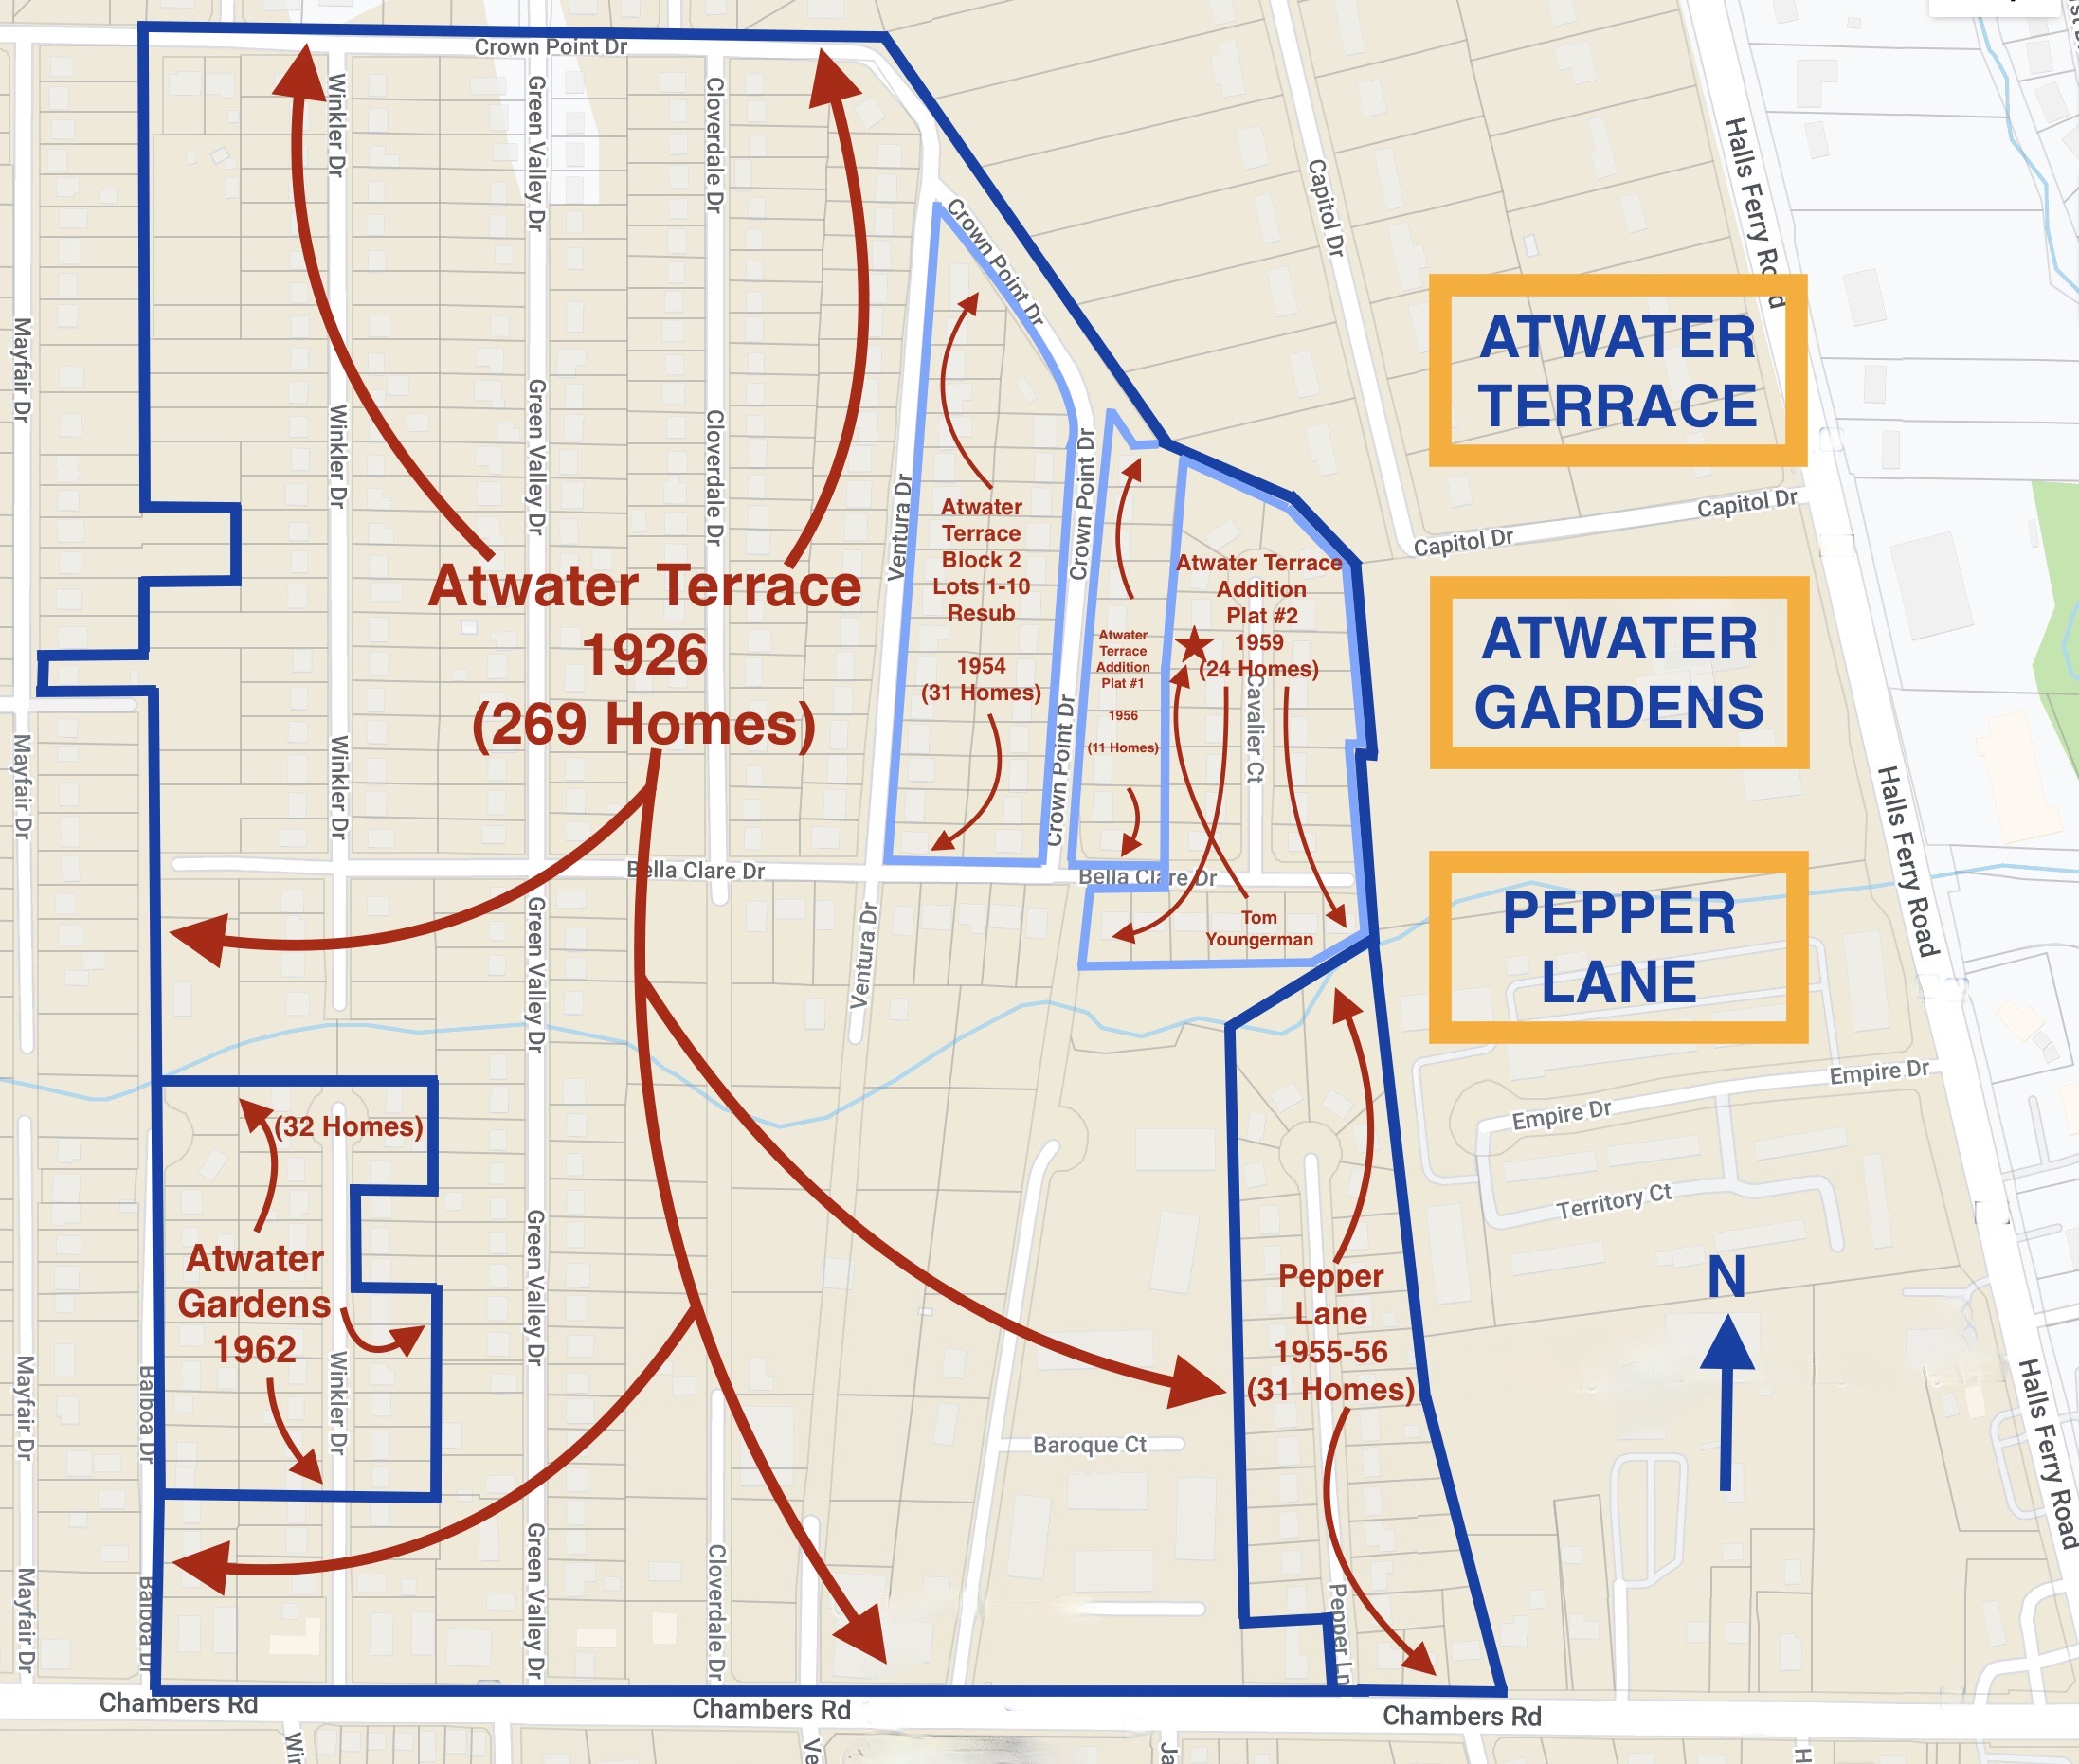 ATWATER TERRACE SUBDIVISIONS MAP